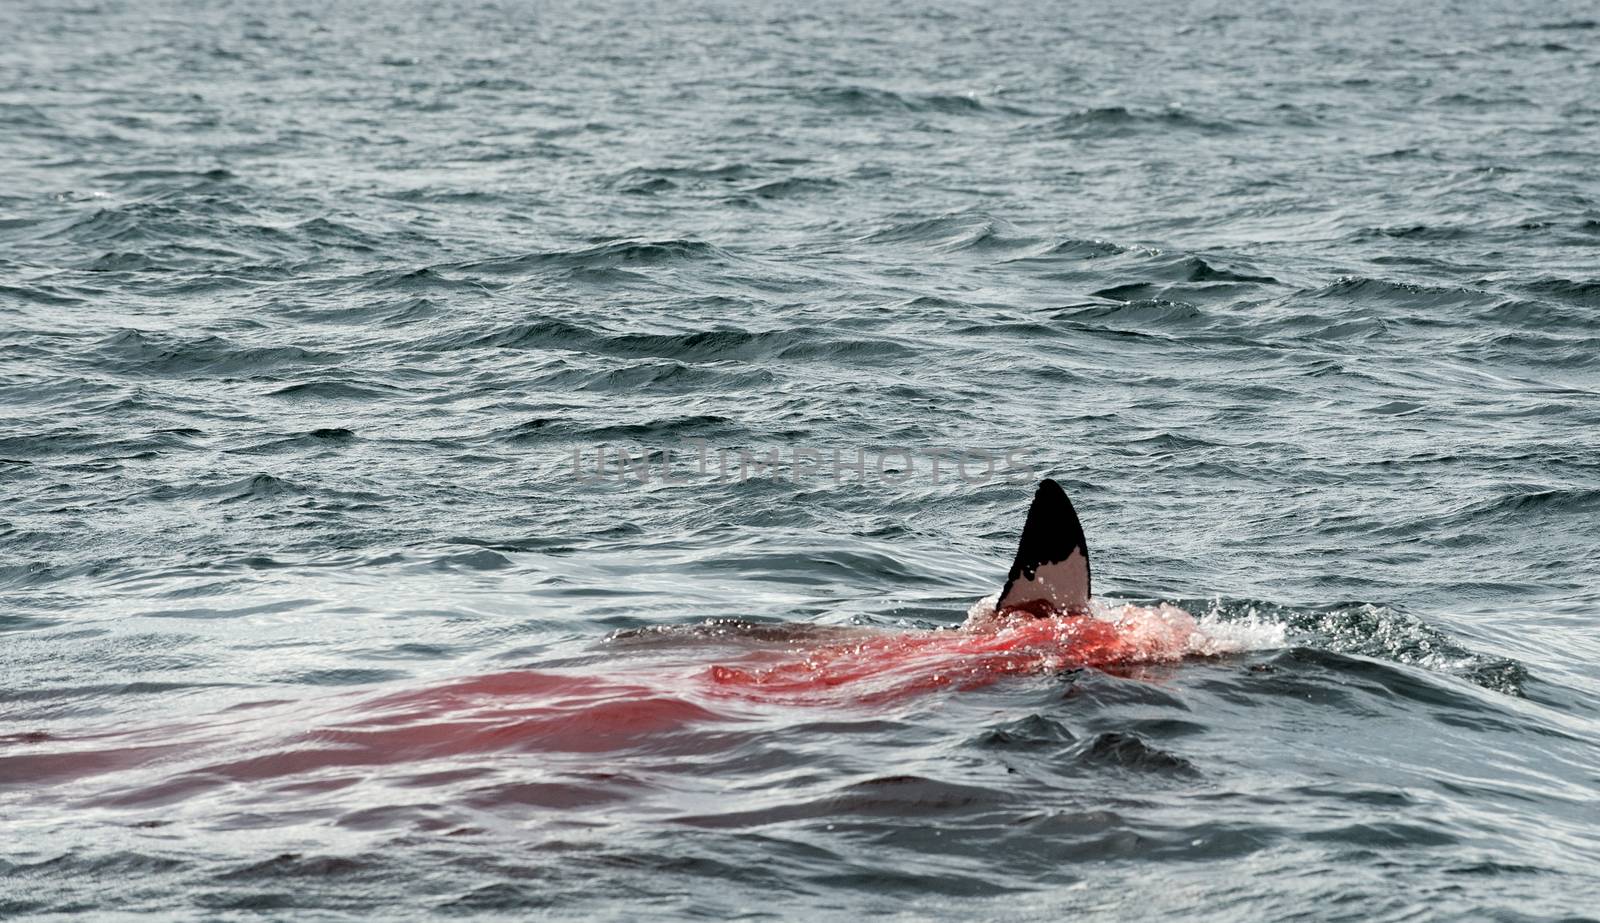 Fin of a Great white shark (Carcharodon carcharias)in the blood. The Great white shark eats the prey in the water.